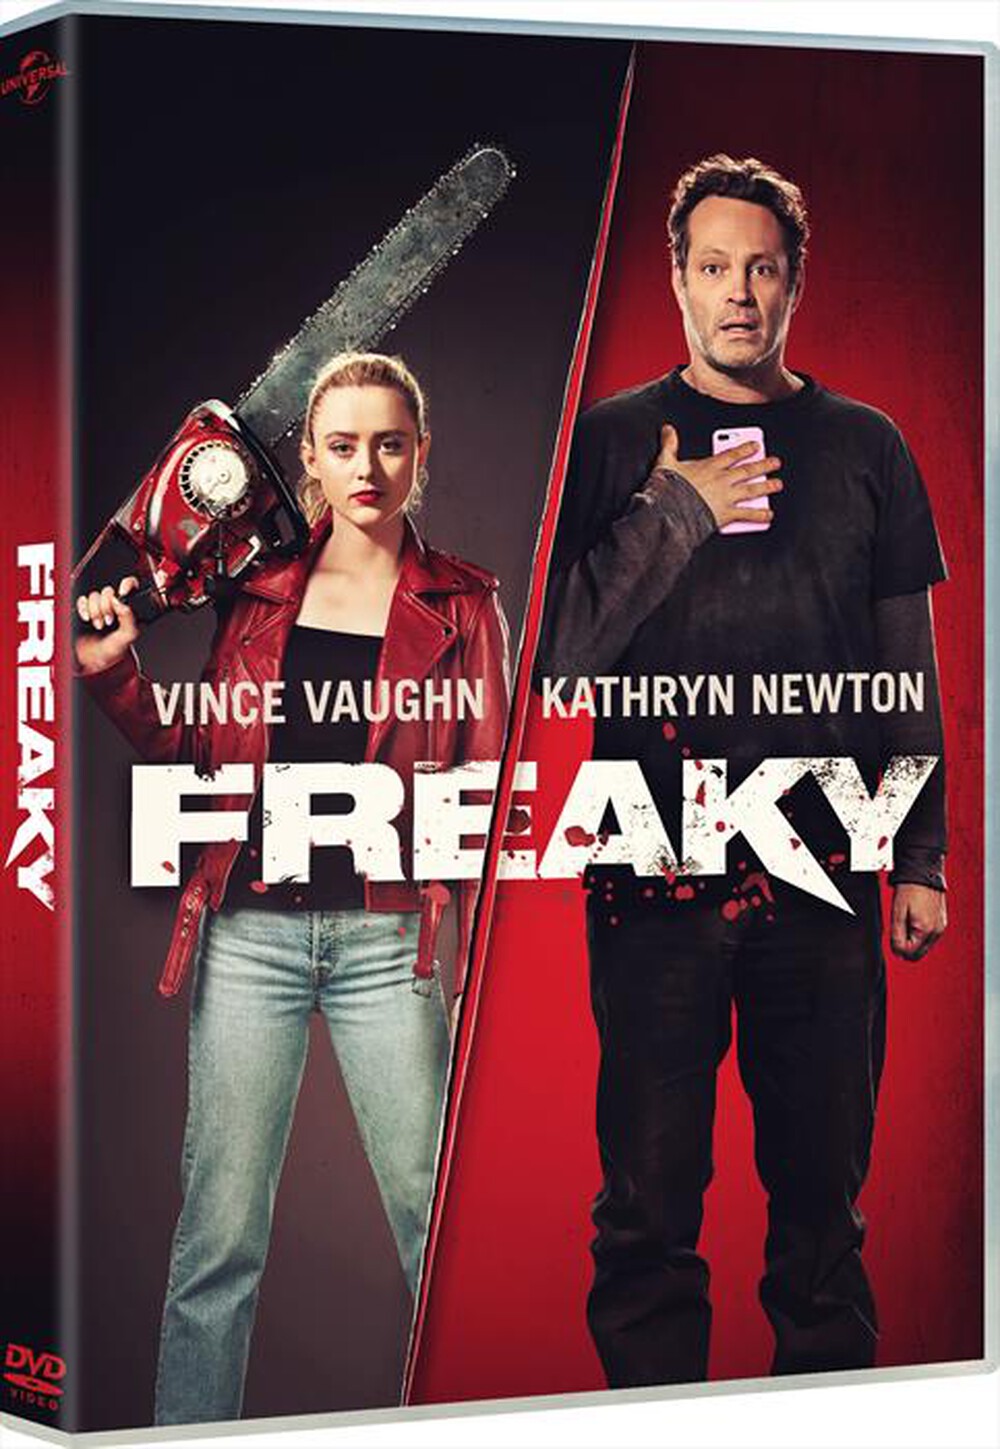 "UNIVERSAL PICTURES - Freaky"